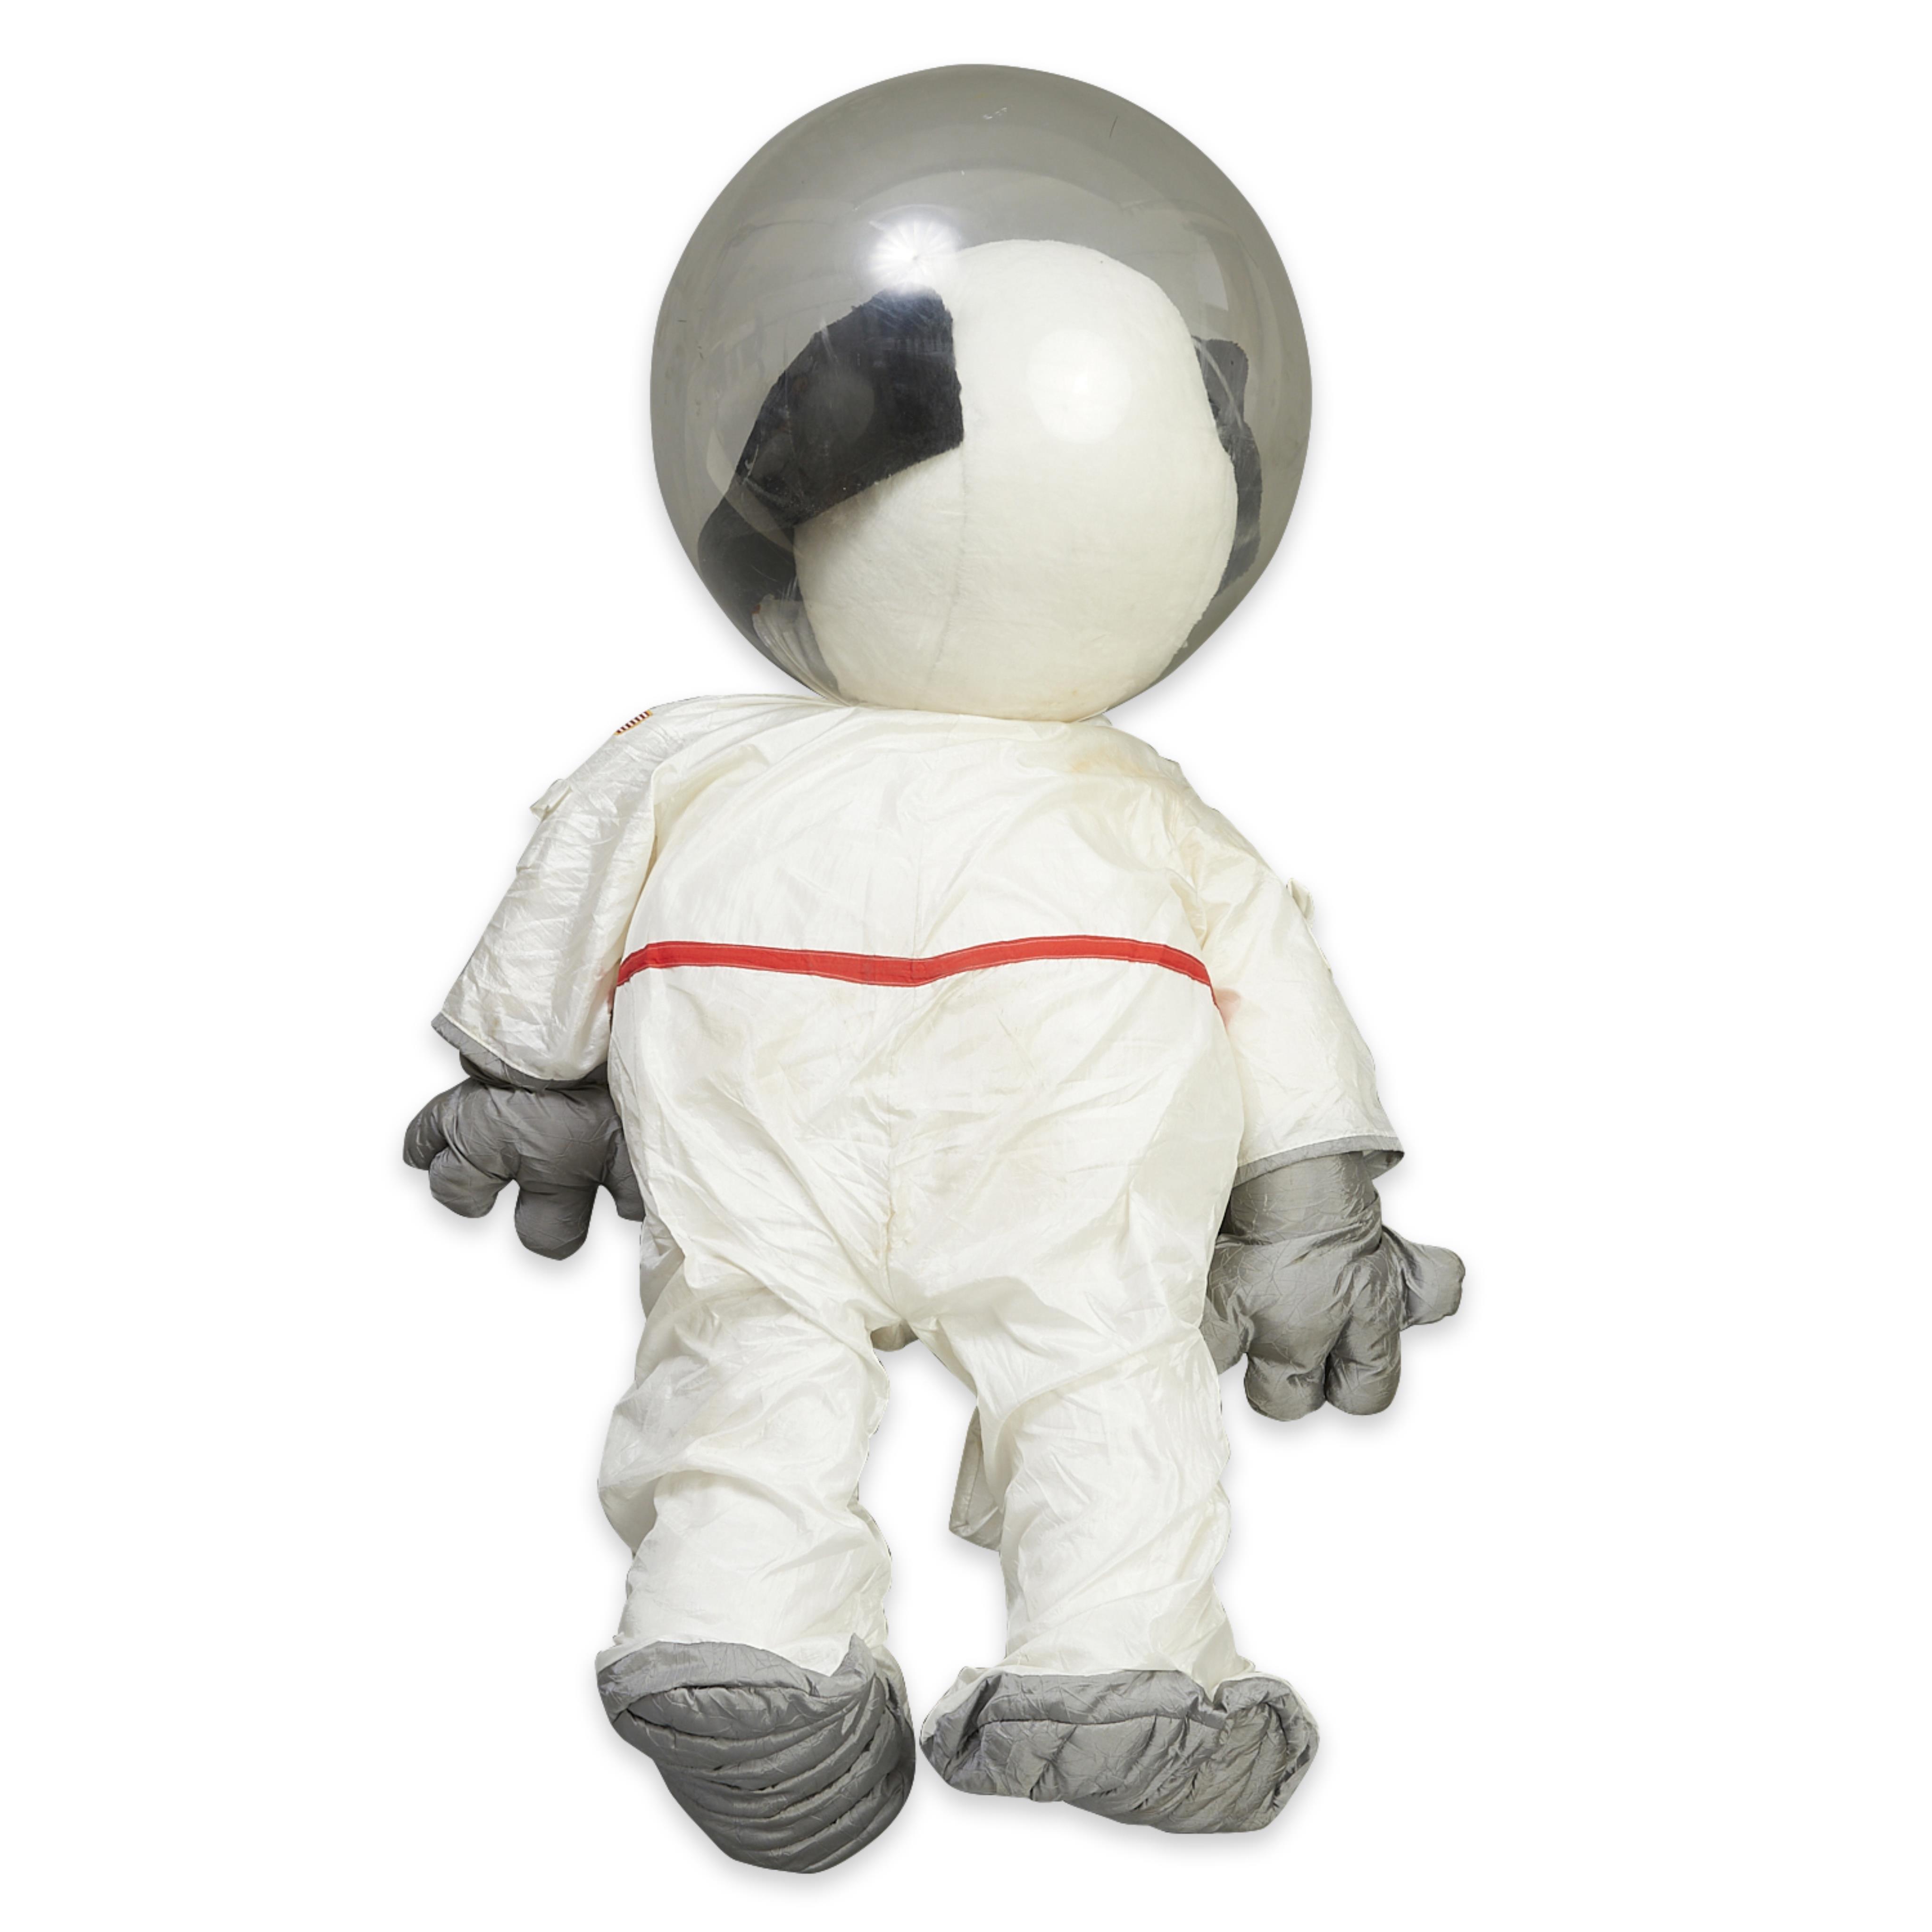 Very Large Stuffed Astronaut Snoopy Doll - Image 4 of 8